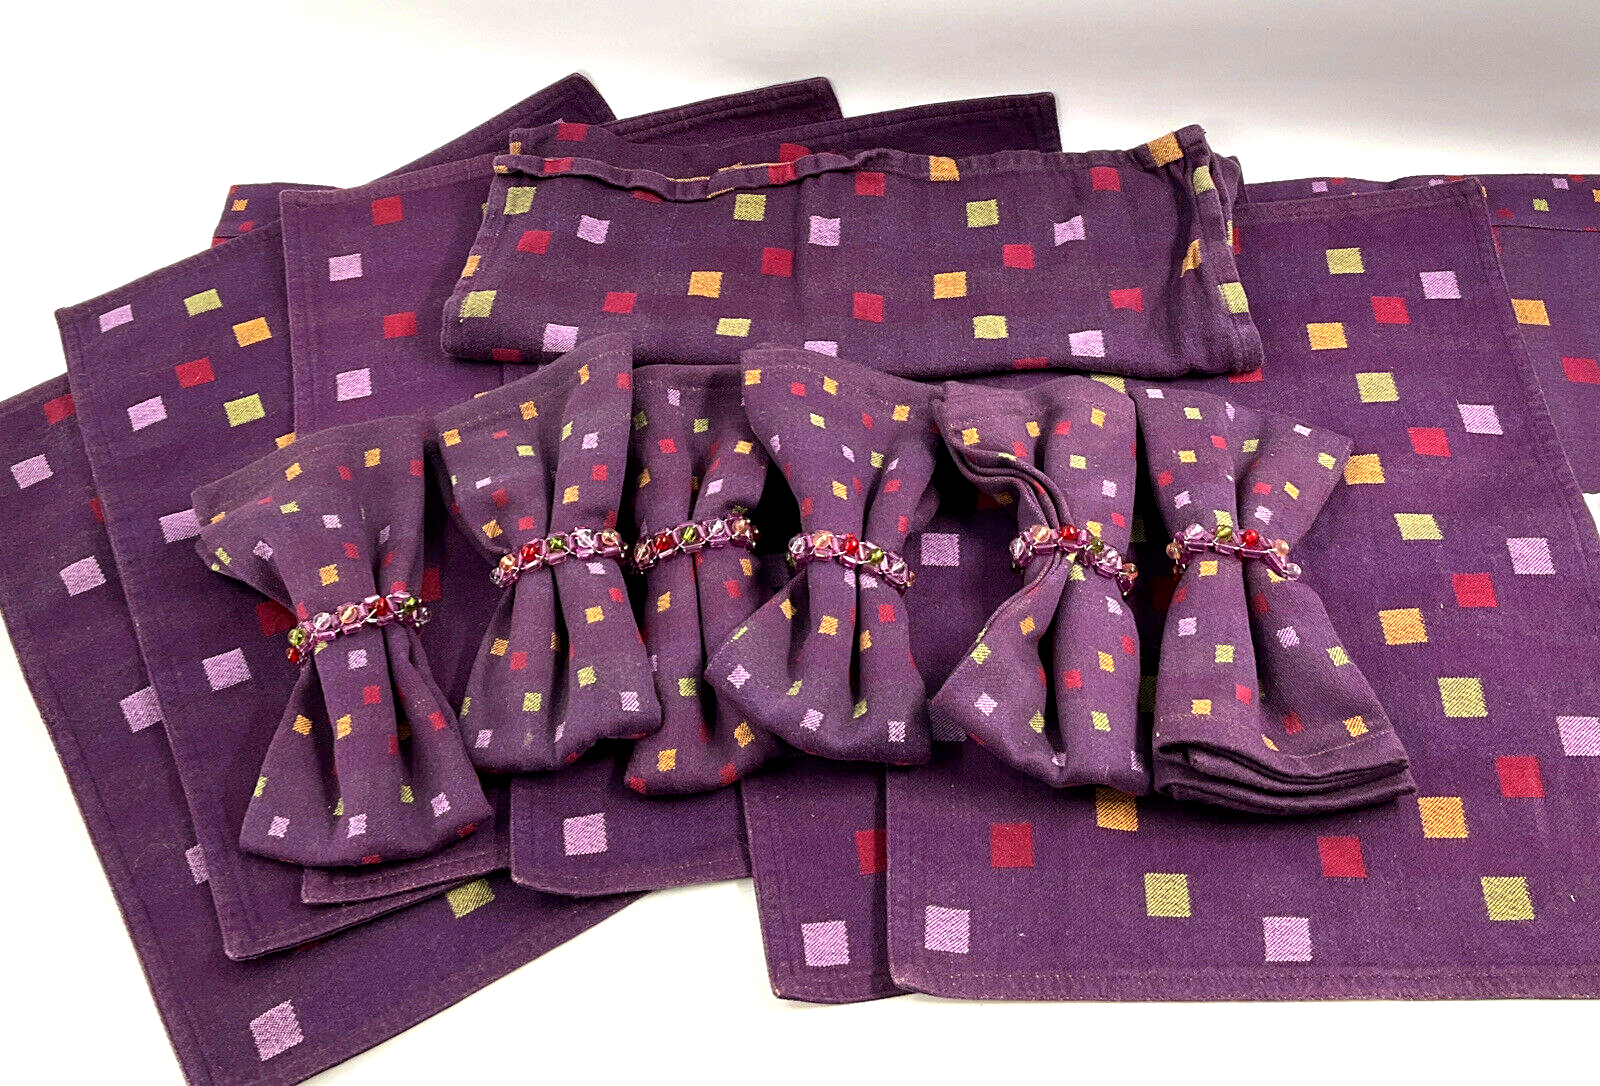 Primary image for Pampered Chef Squares Purple (Matches Dots) Coth Napkins, Placemats Table Runner